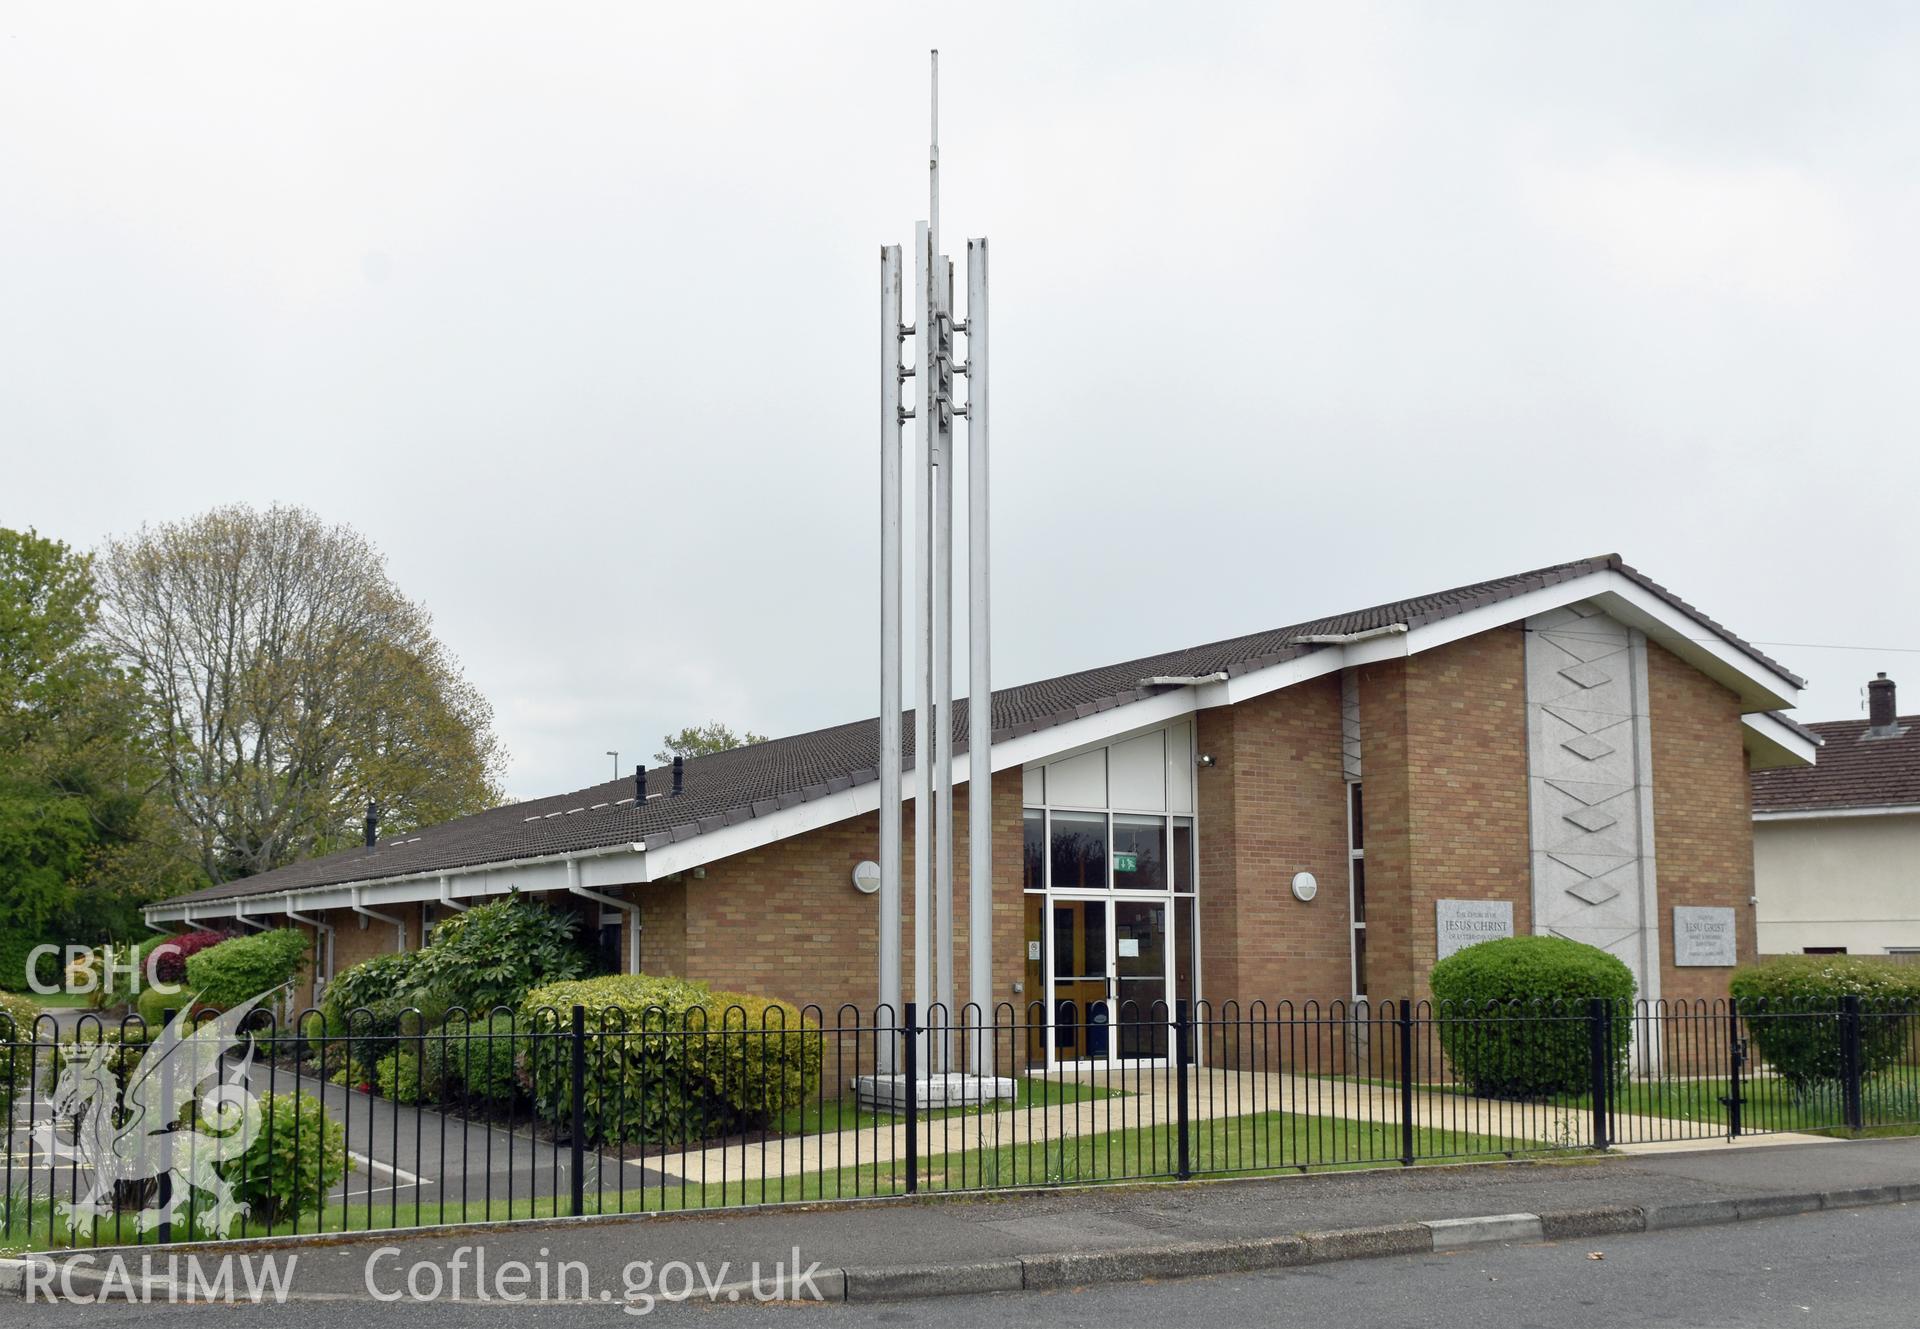 Exterior view showing side and front elevations of the Church of Jesus Christ of Latter Day Saints, Cwmbran, photographed by Susan Fielding of RCAHMW on 1 May 2021